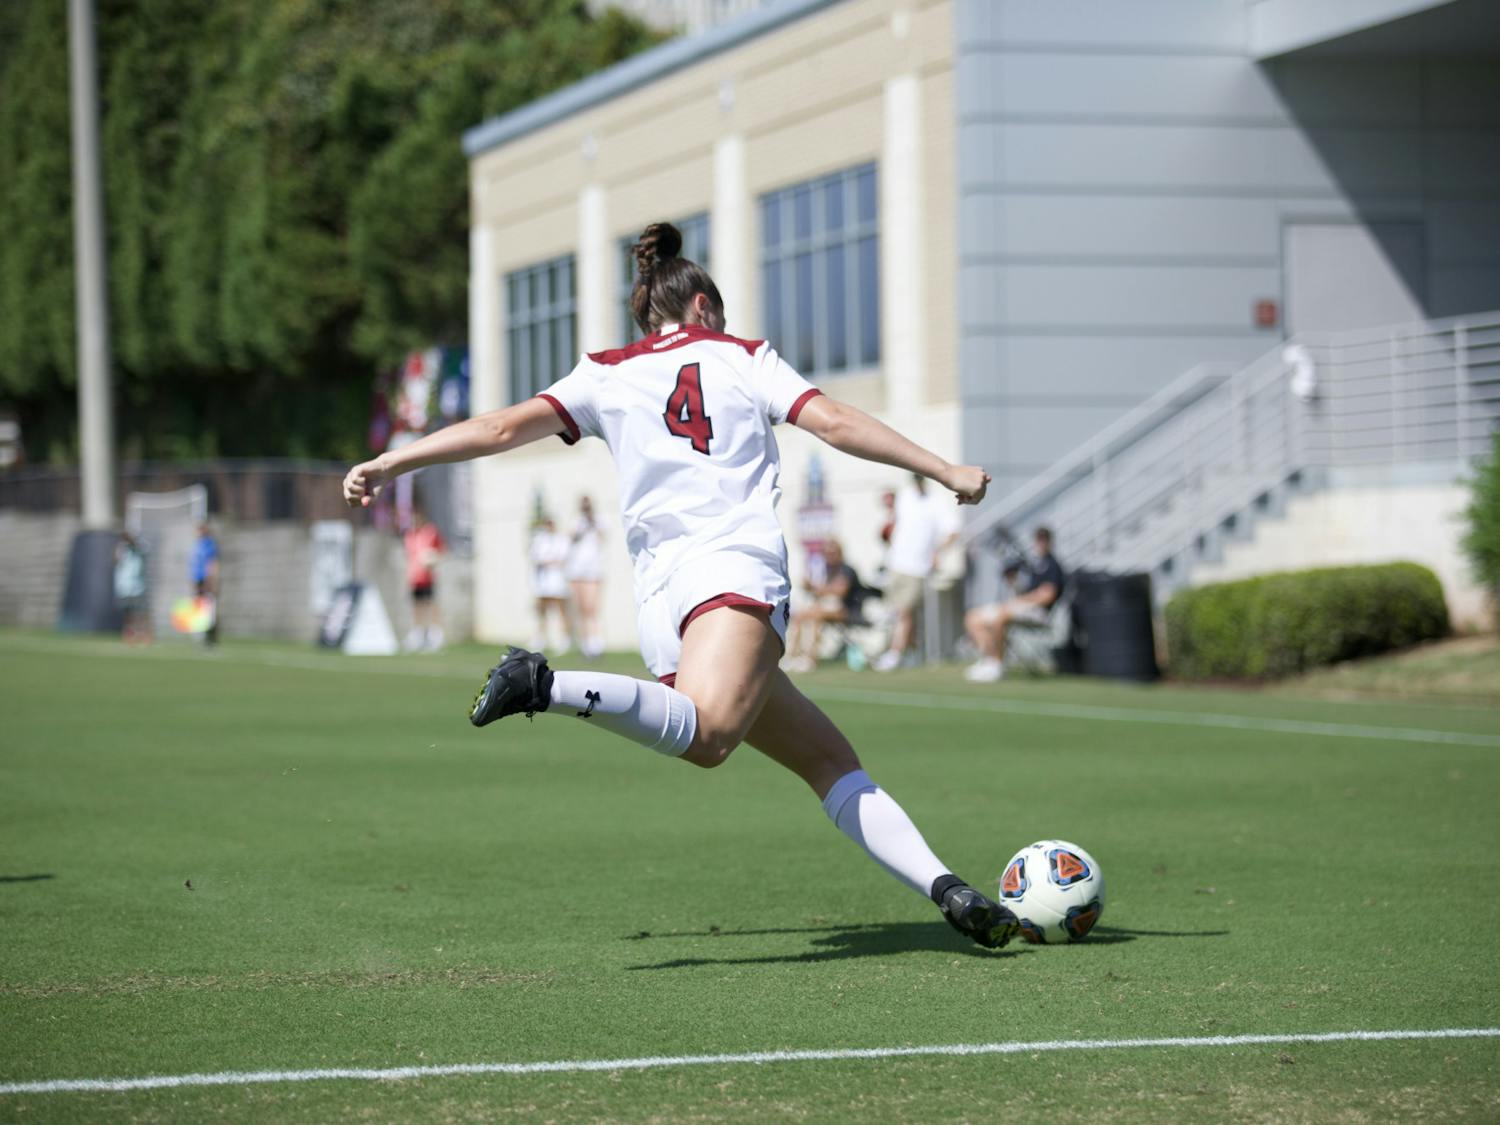 Freshman forward Shae O’Rourke gets ready to send a long pass down the field in South Carolina's match against Arkansas on Sept. 25, 2022